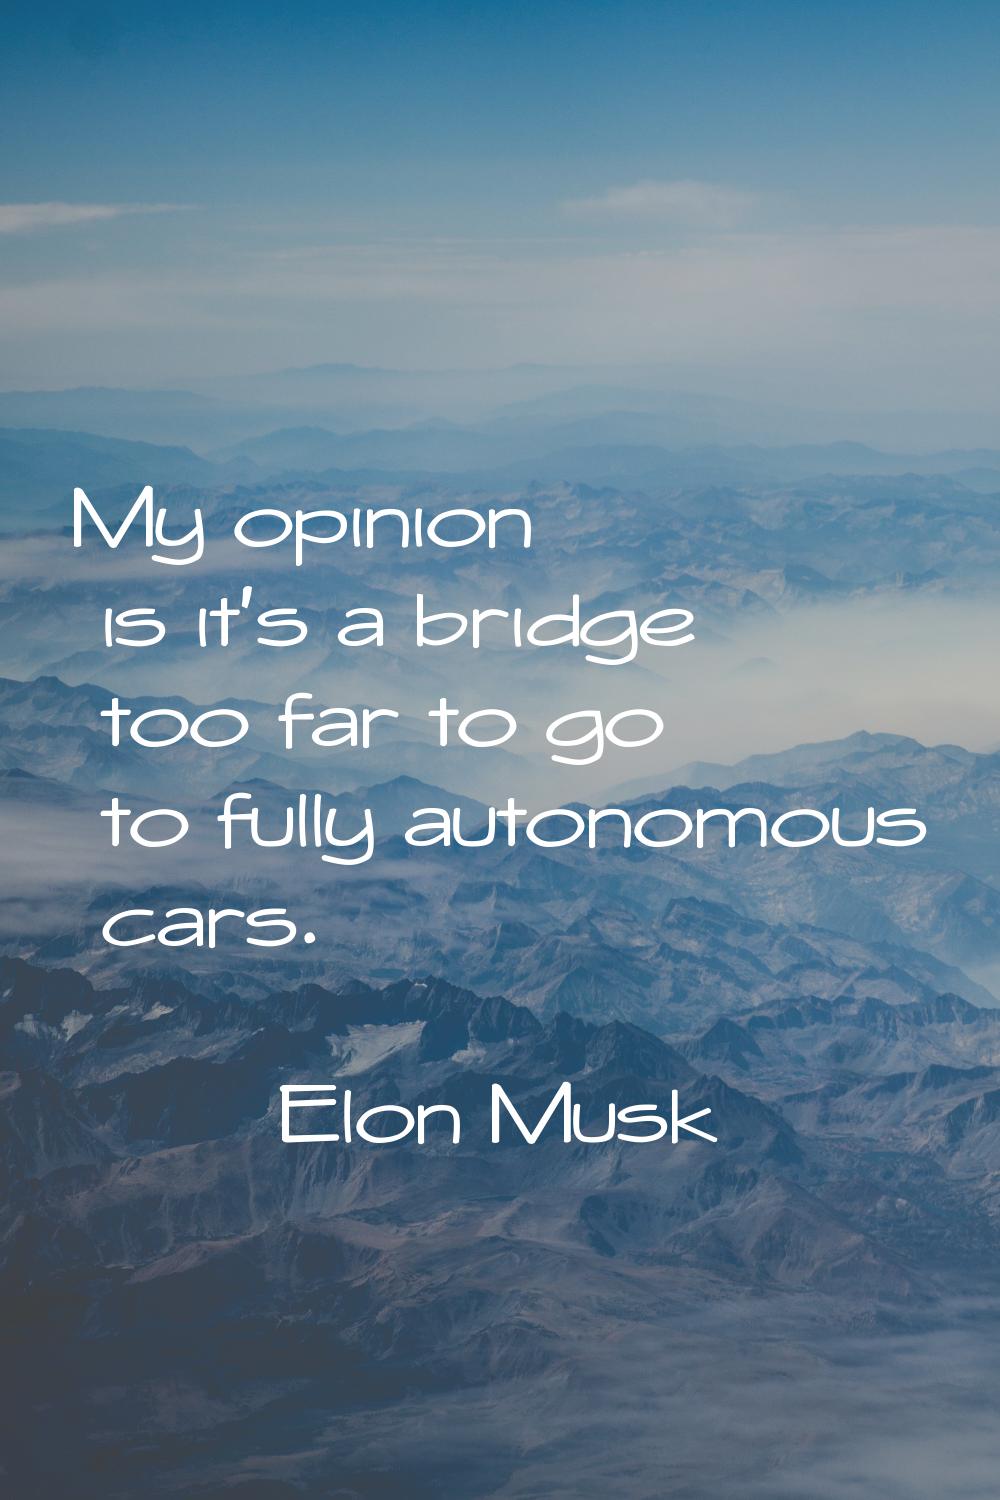 My opinion is it's a bridge too far to go to fully autonomous cars.